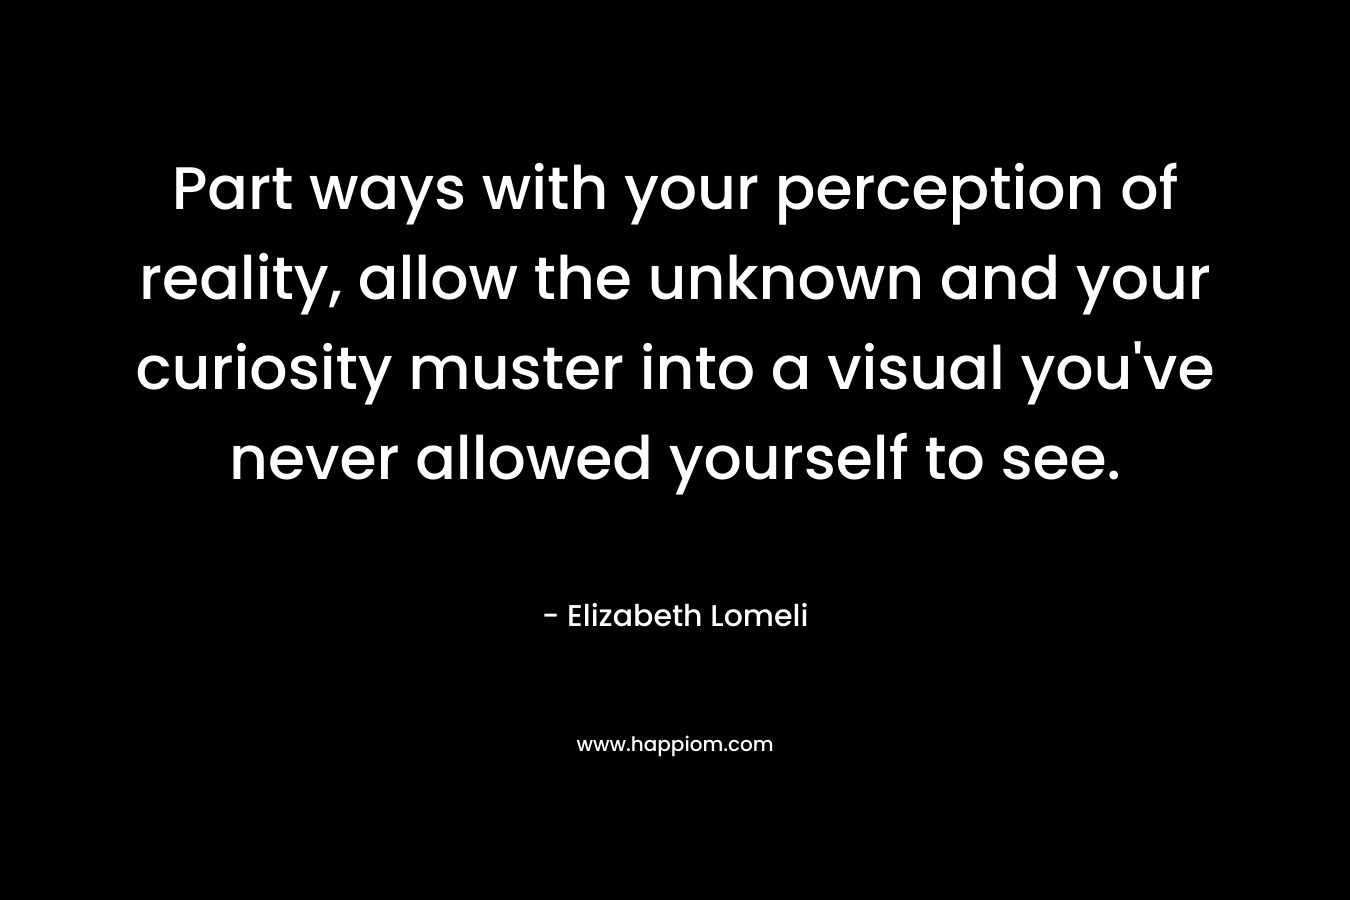 Part ways with your perception of reality, allow the unknown and your curiosity muster into a visual you’ve never allowed yourself to see. – Elizabeth Lomeli